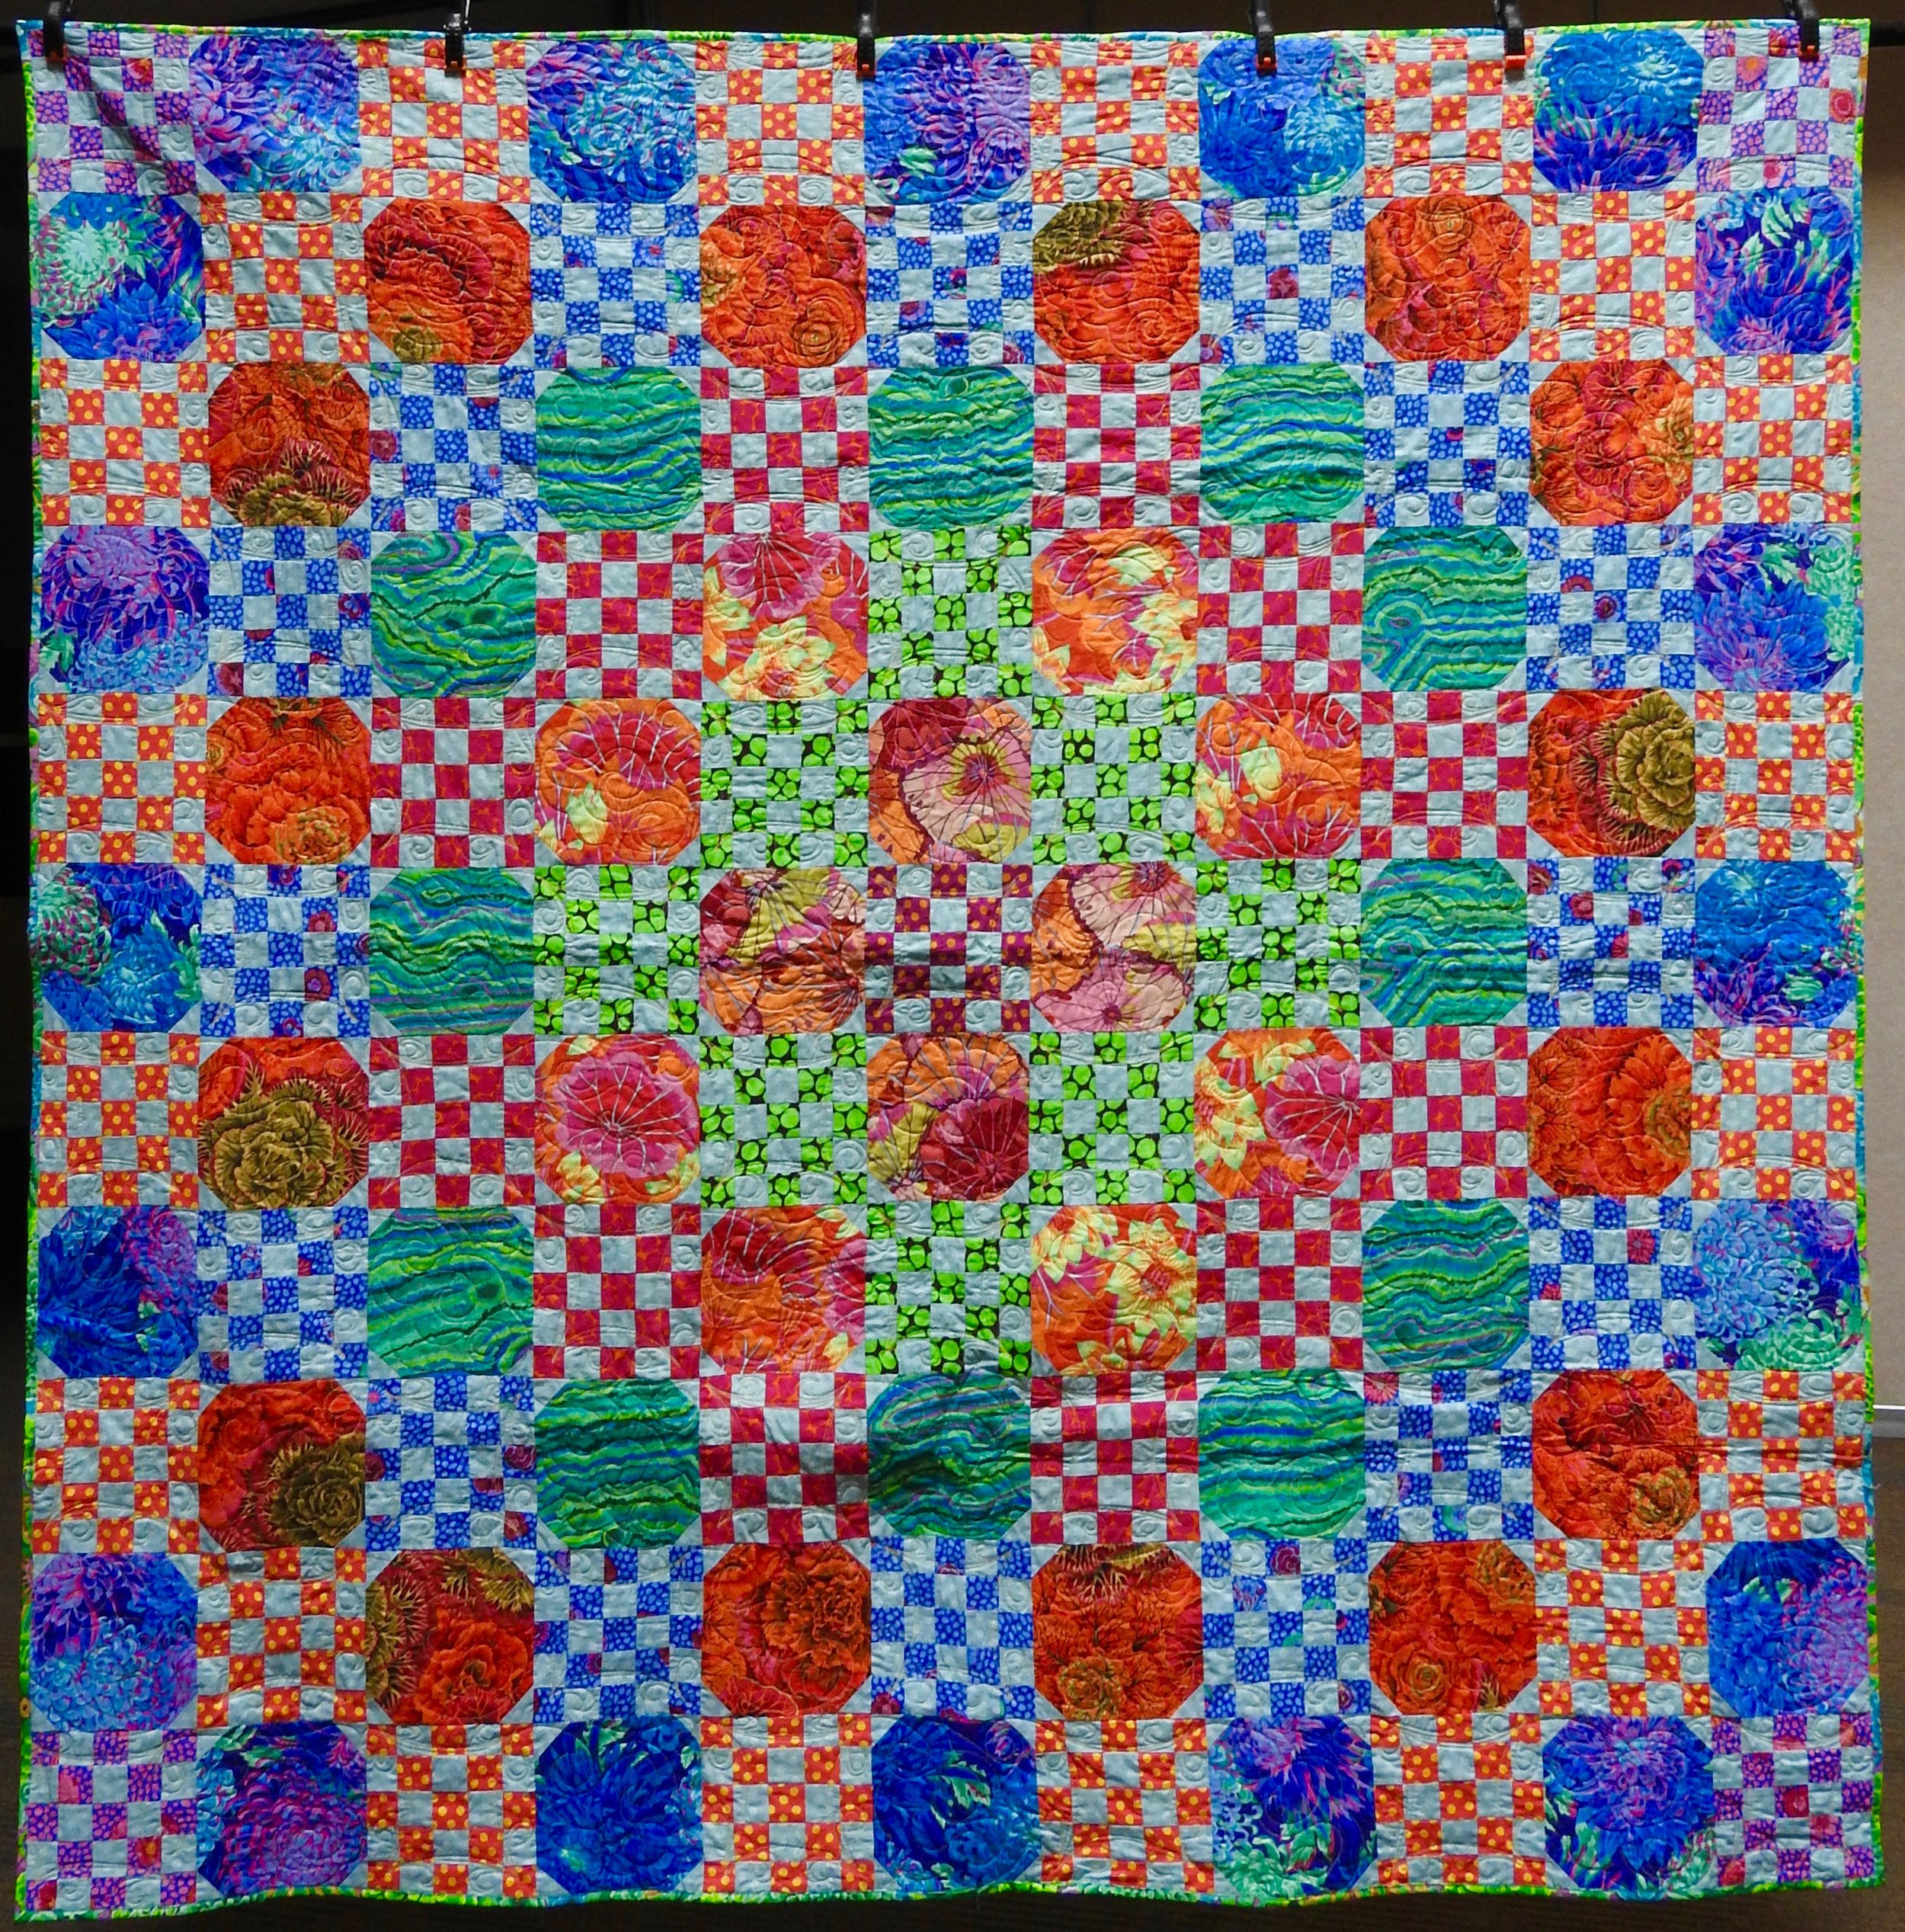 Kaffe Fassett 2018 Mystery Quilt, Pieced, Custom Machine Quilted, donated by Linda Duncan, 80 x 80”